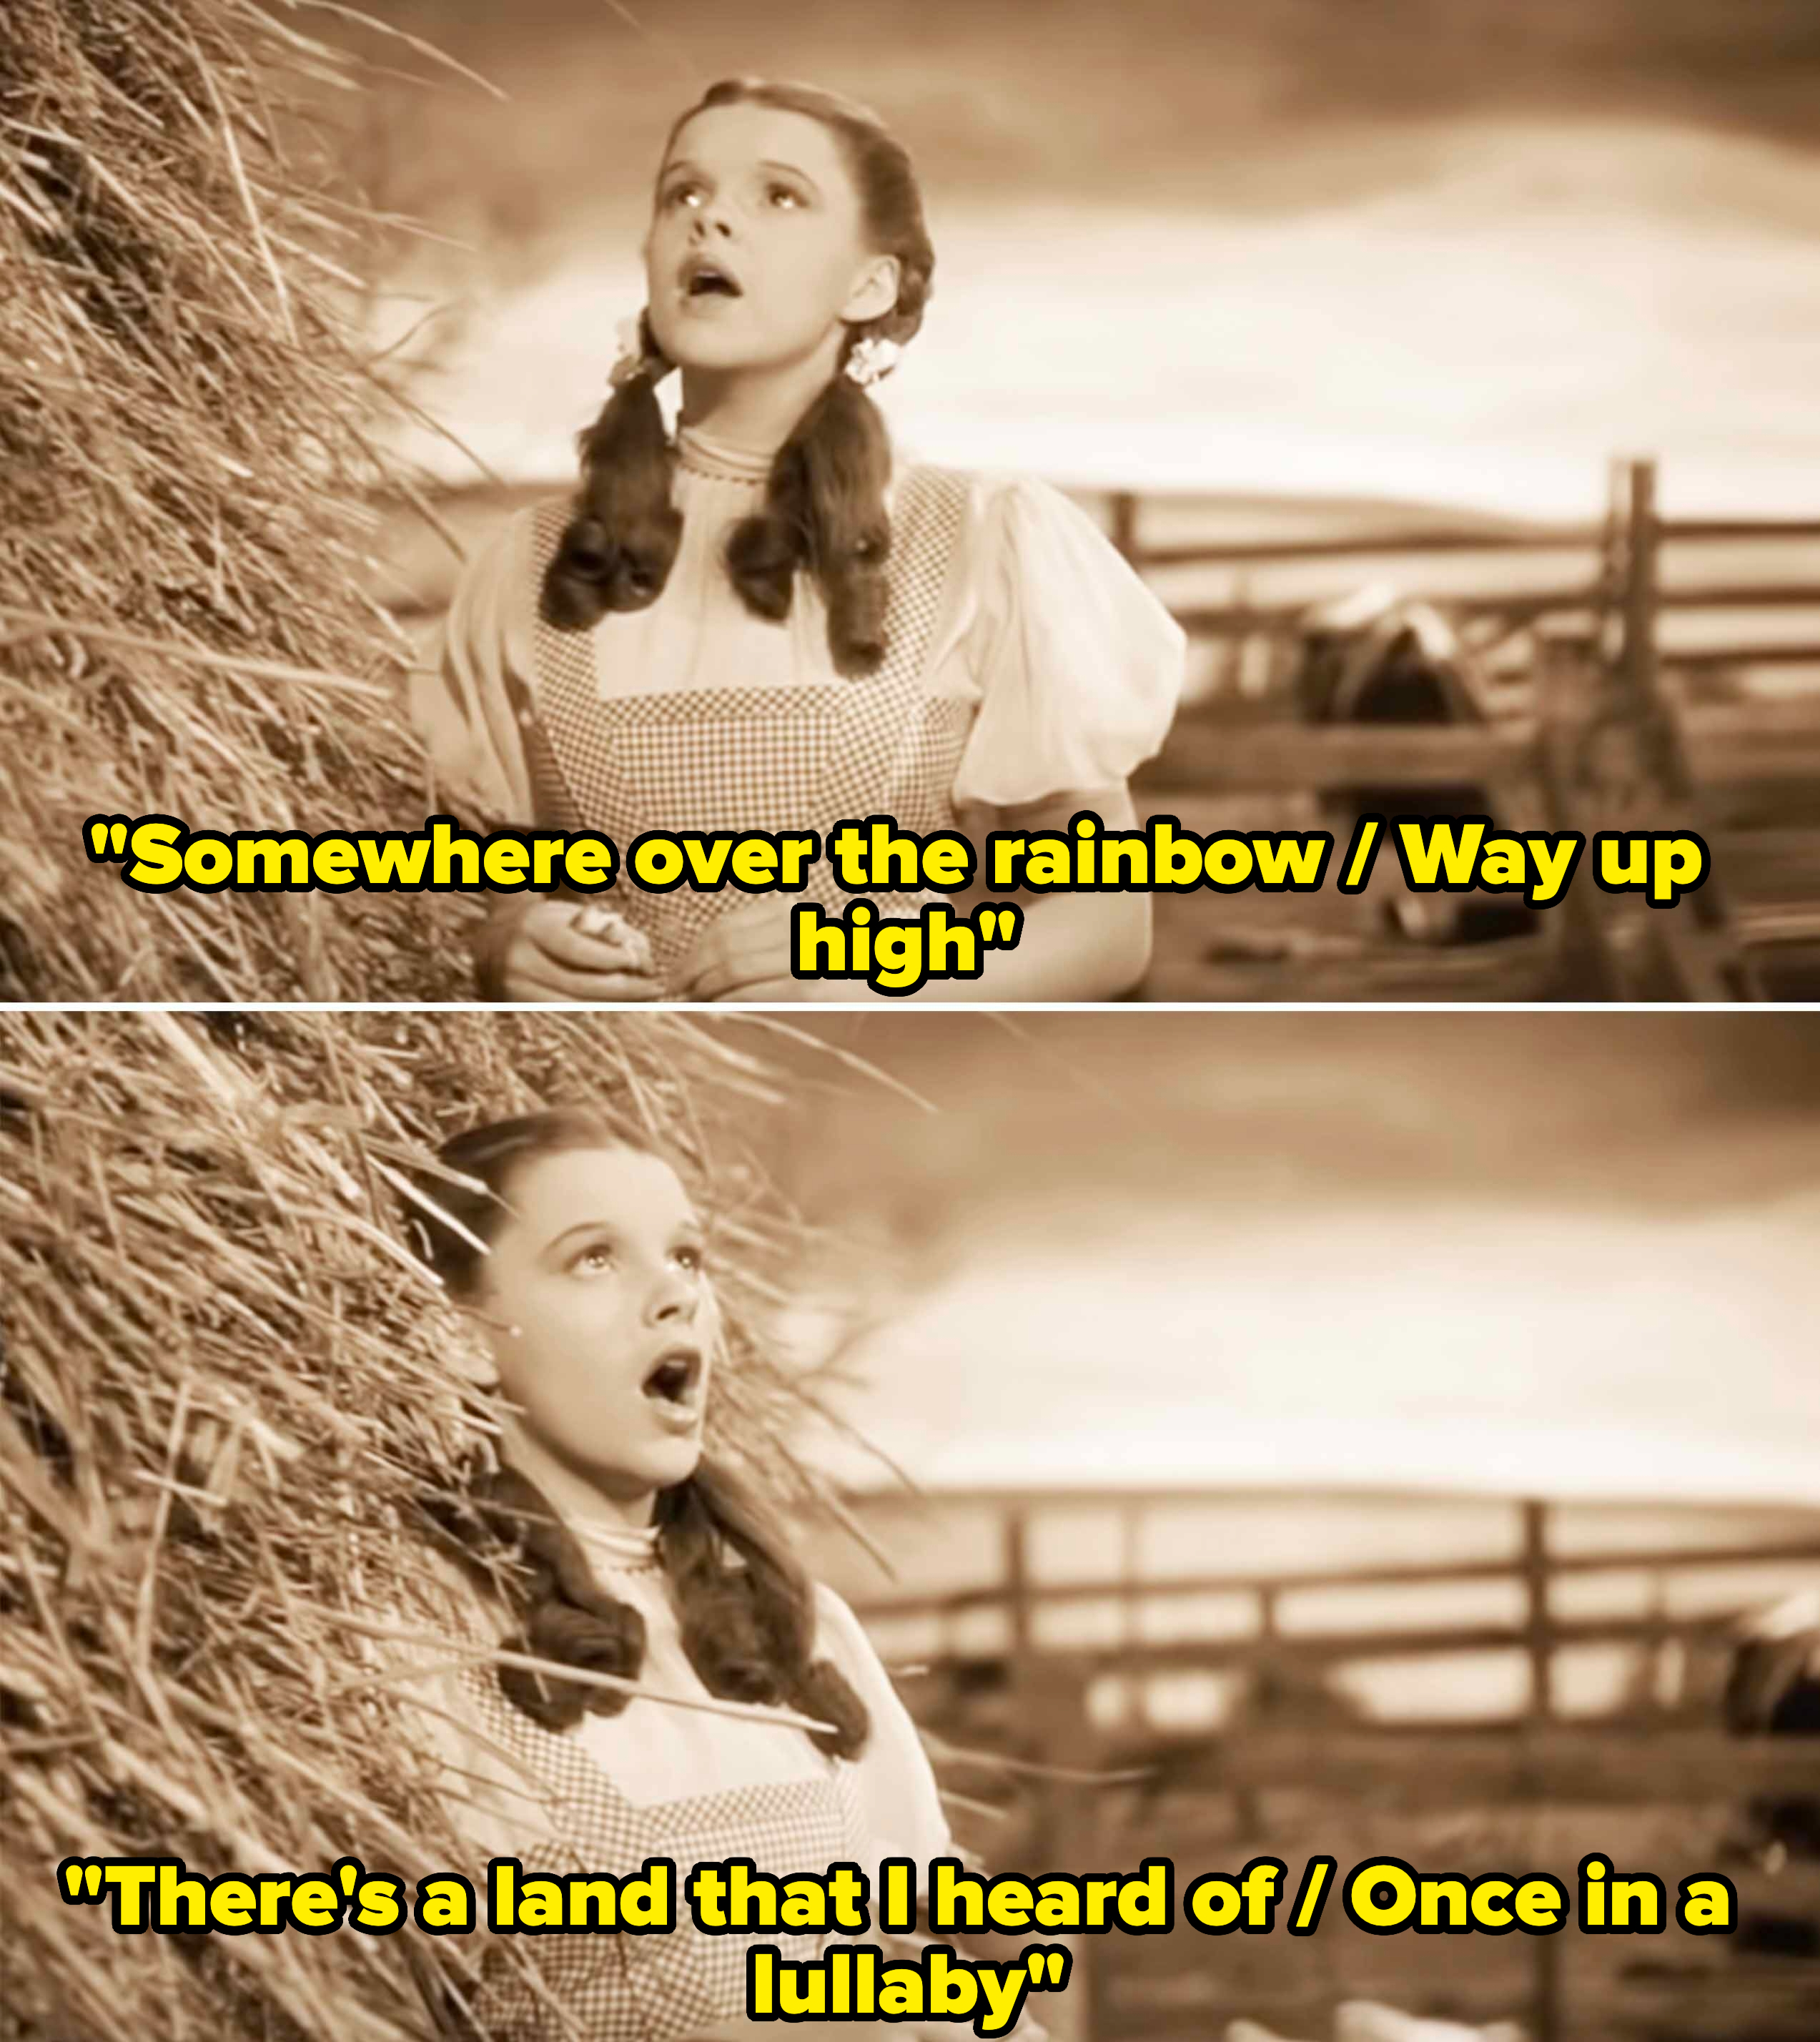 Judy Garland as Dorothy singing about the land she heard of once in a lullaby